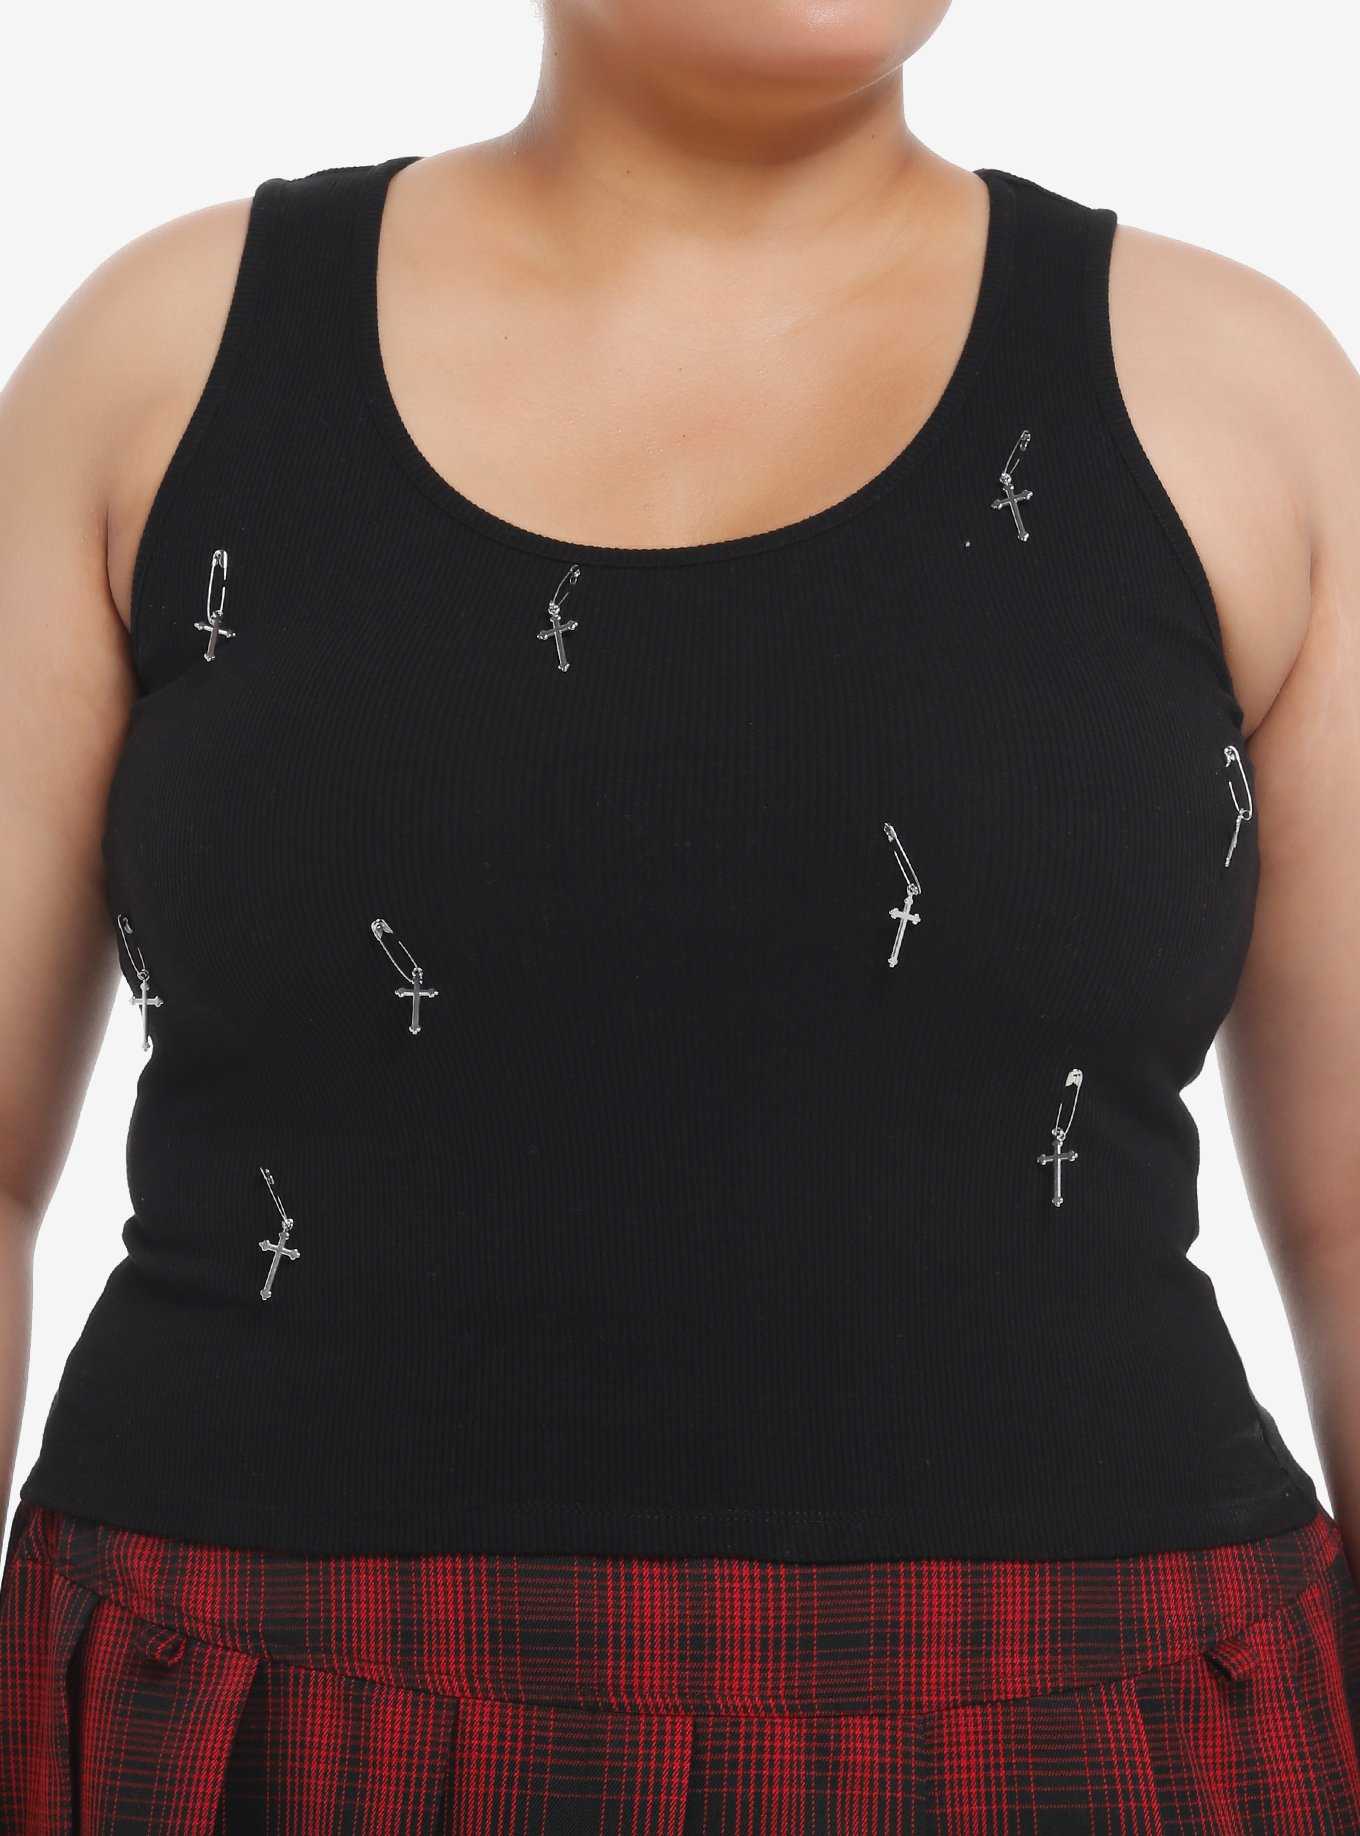 Social Collision Safety Pin Cross Charm Girls Tank Top Plus Size, , hi-res